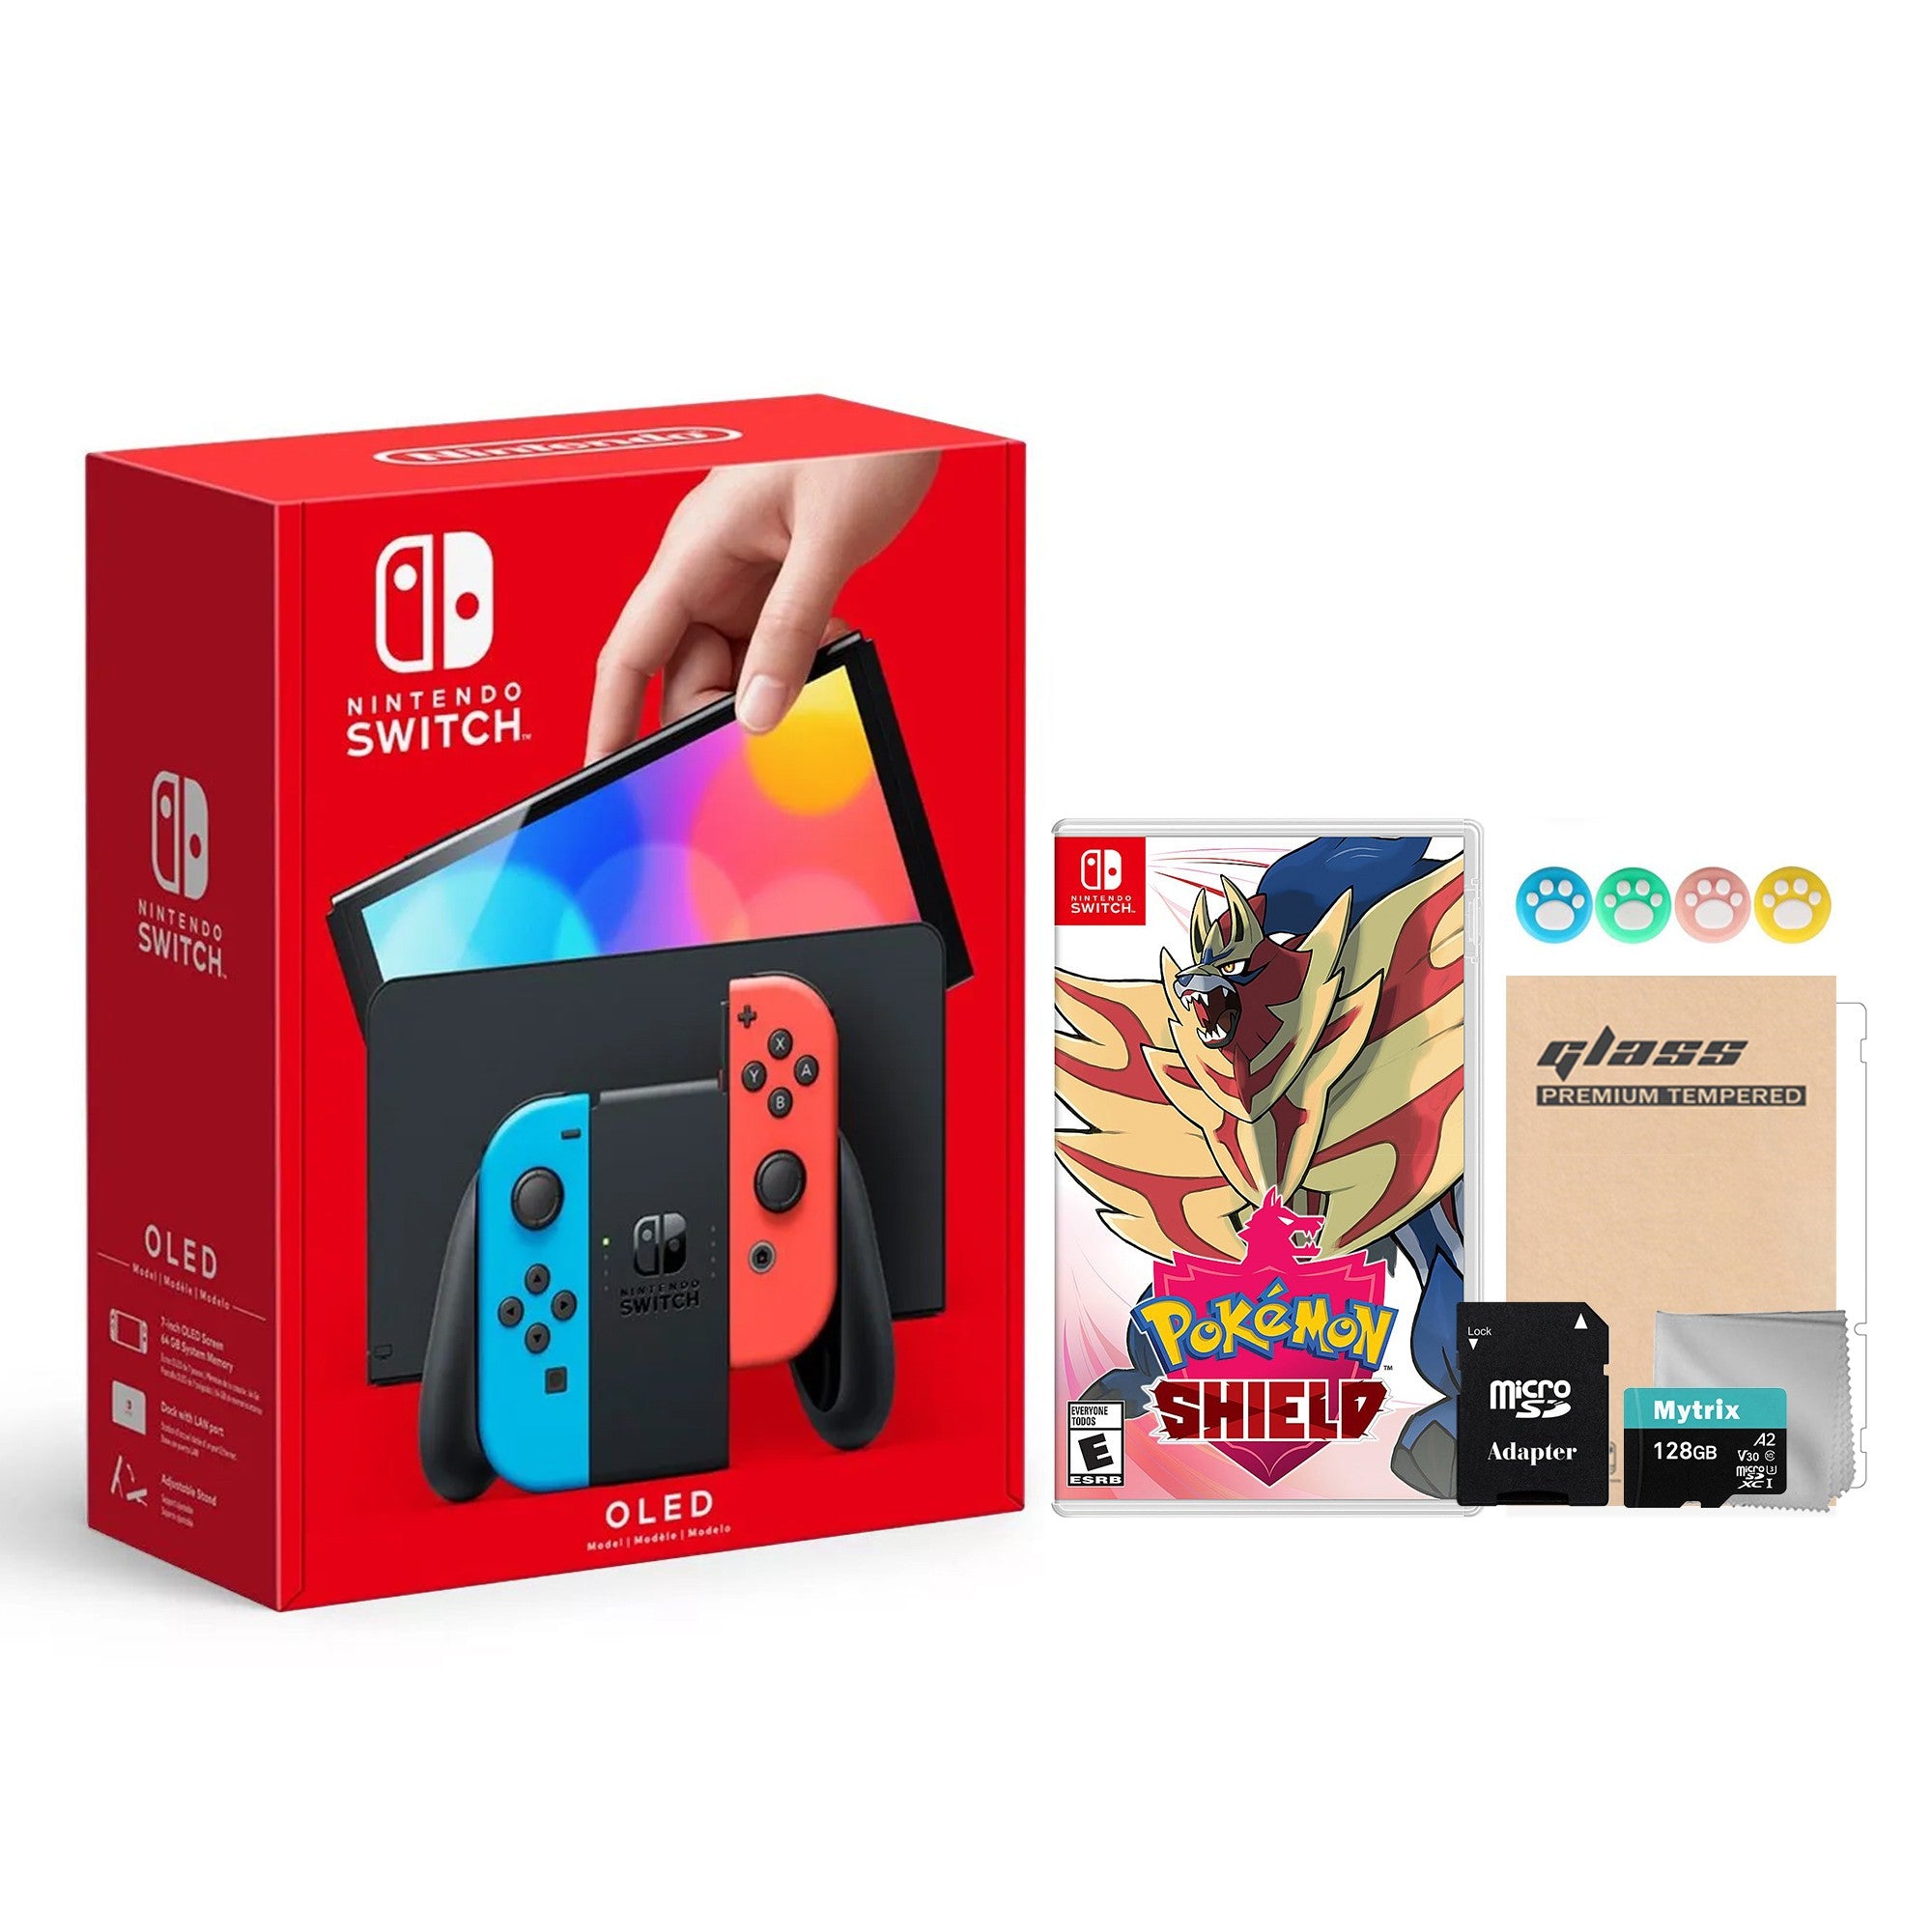 2022 New Nintendo Switch OLED Model Neon Red & Blue Joy Con 64GB Console HD Screen & LAN-Port Dock with Pokemon Shield, Mytrix 128GB MicroSD Card and Accessories